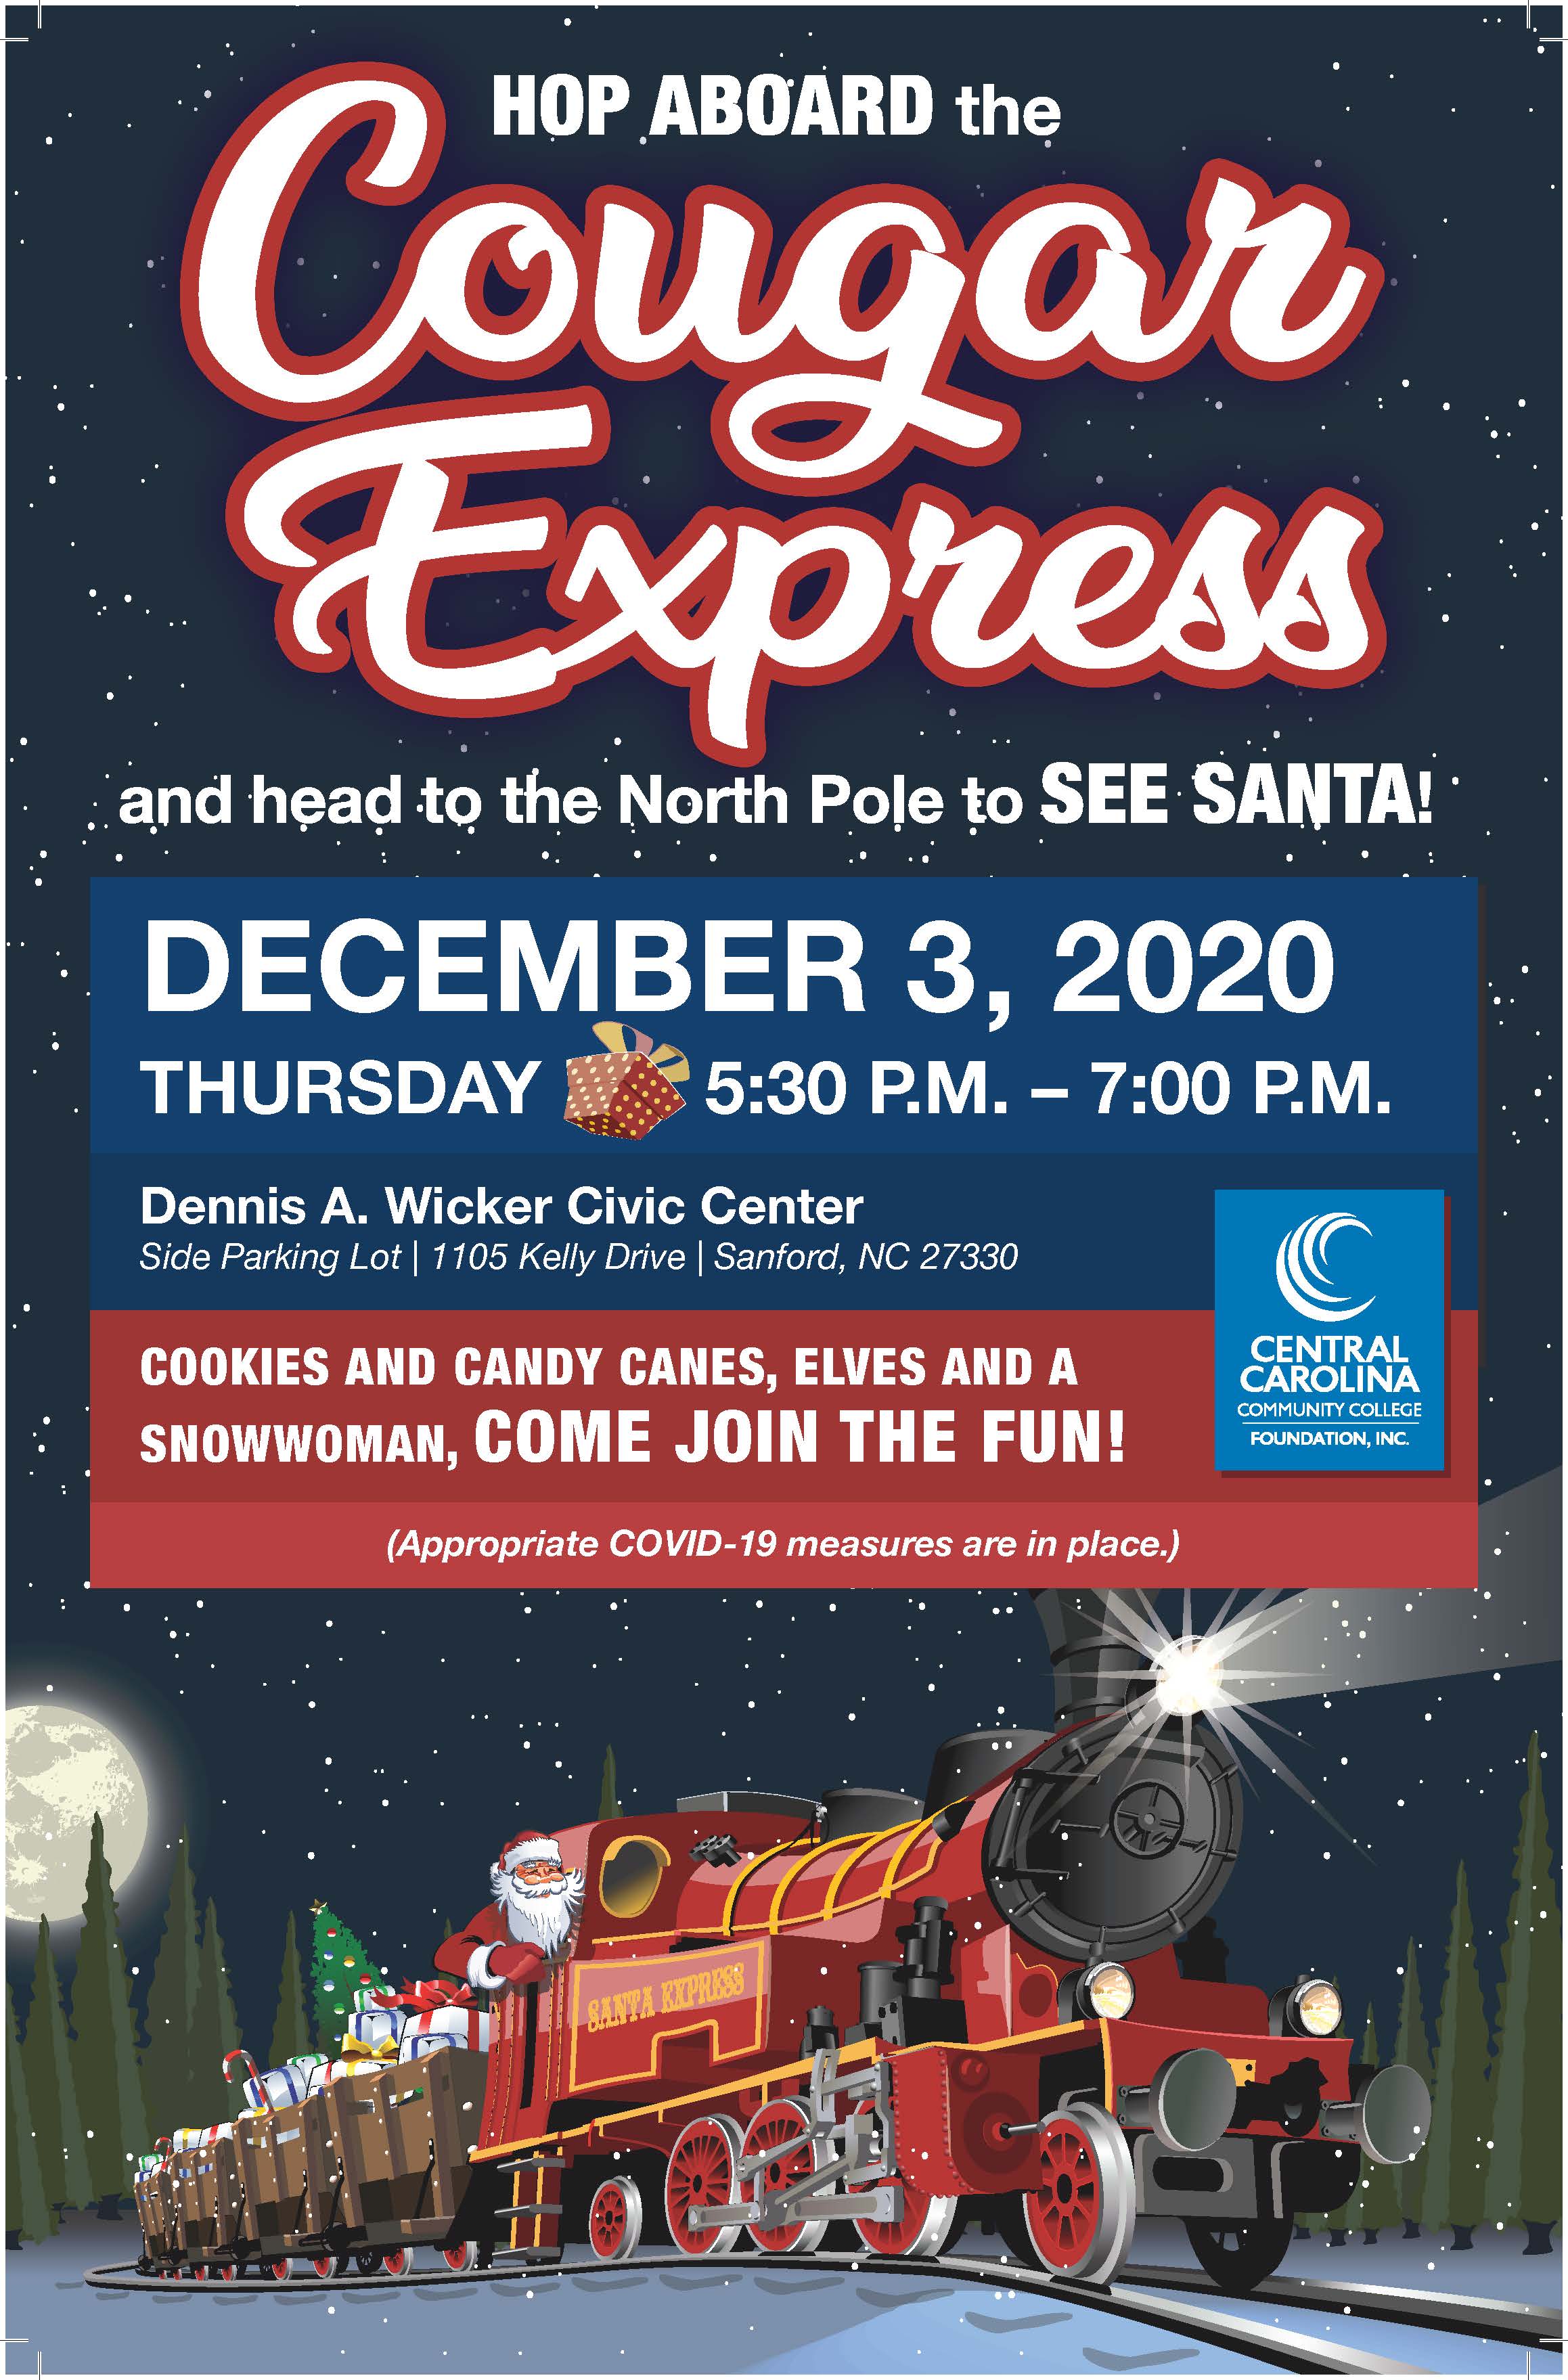 Read the full story, Cougar Express holiday drive-thru event set for Dec. 3